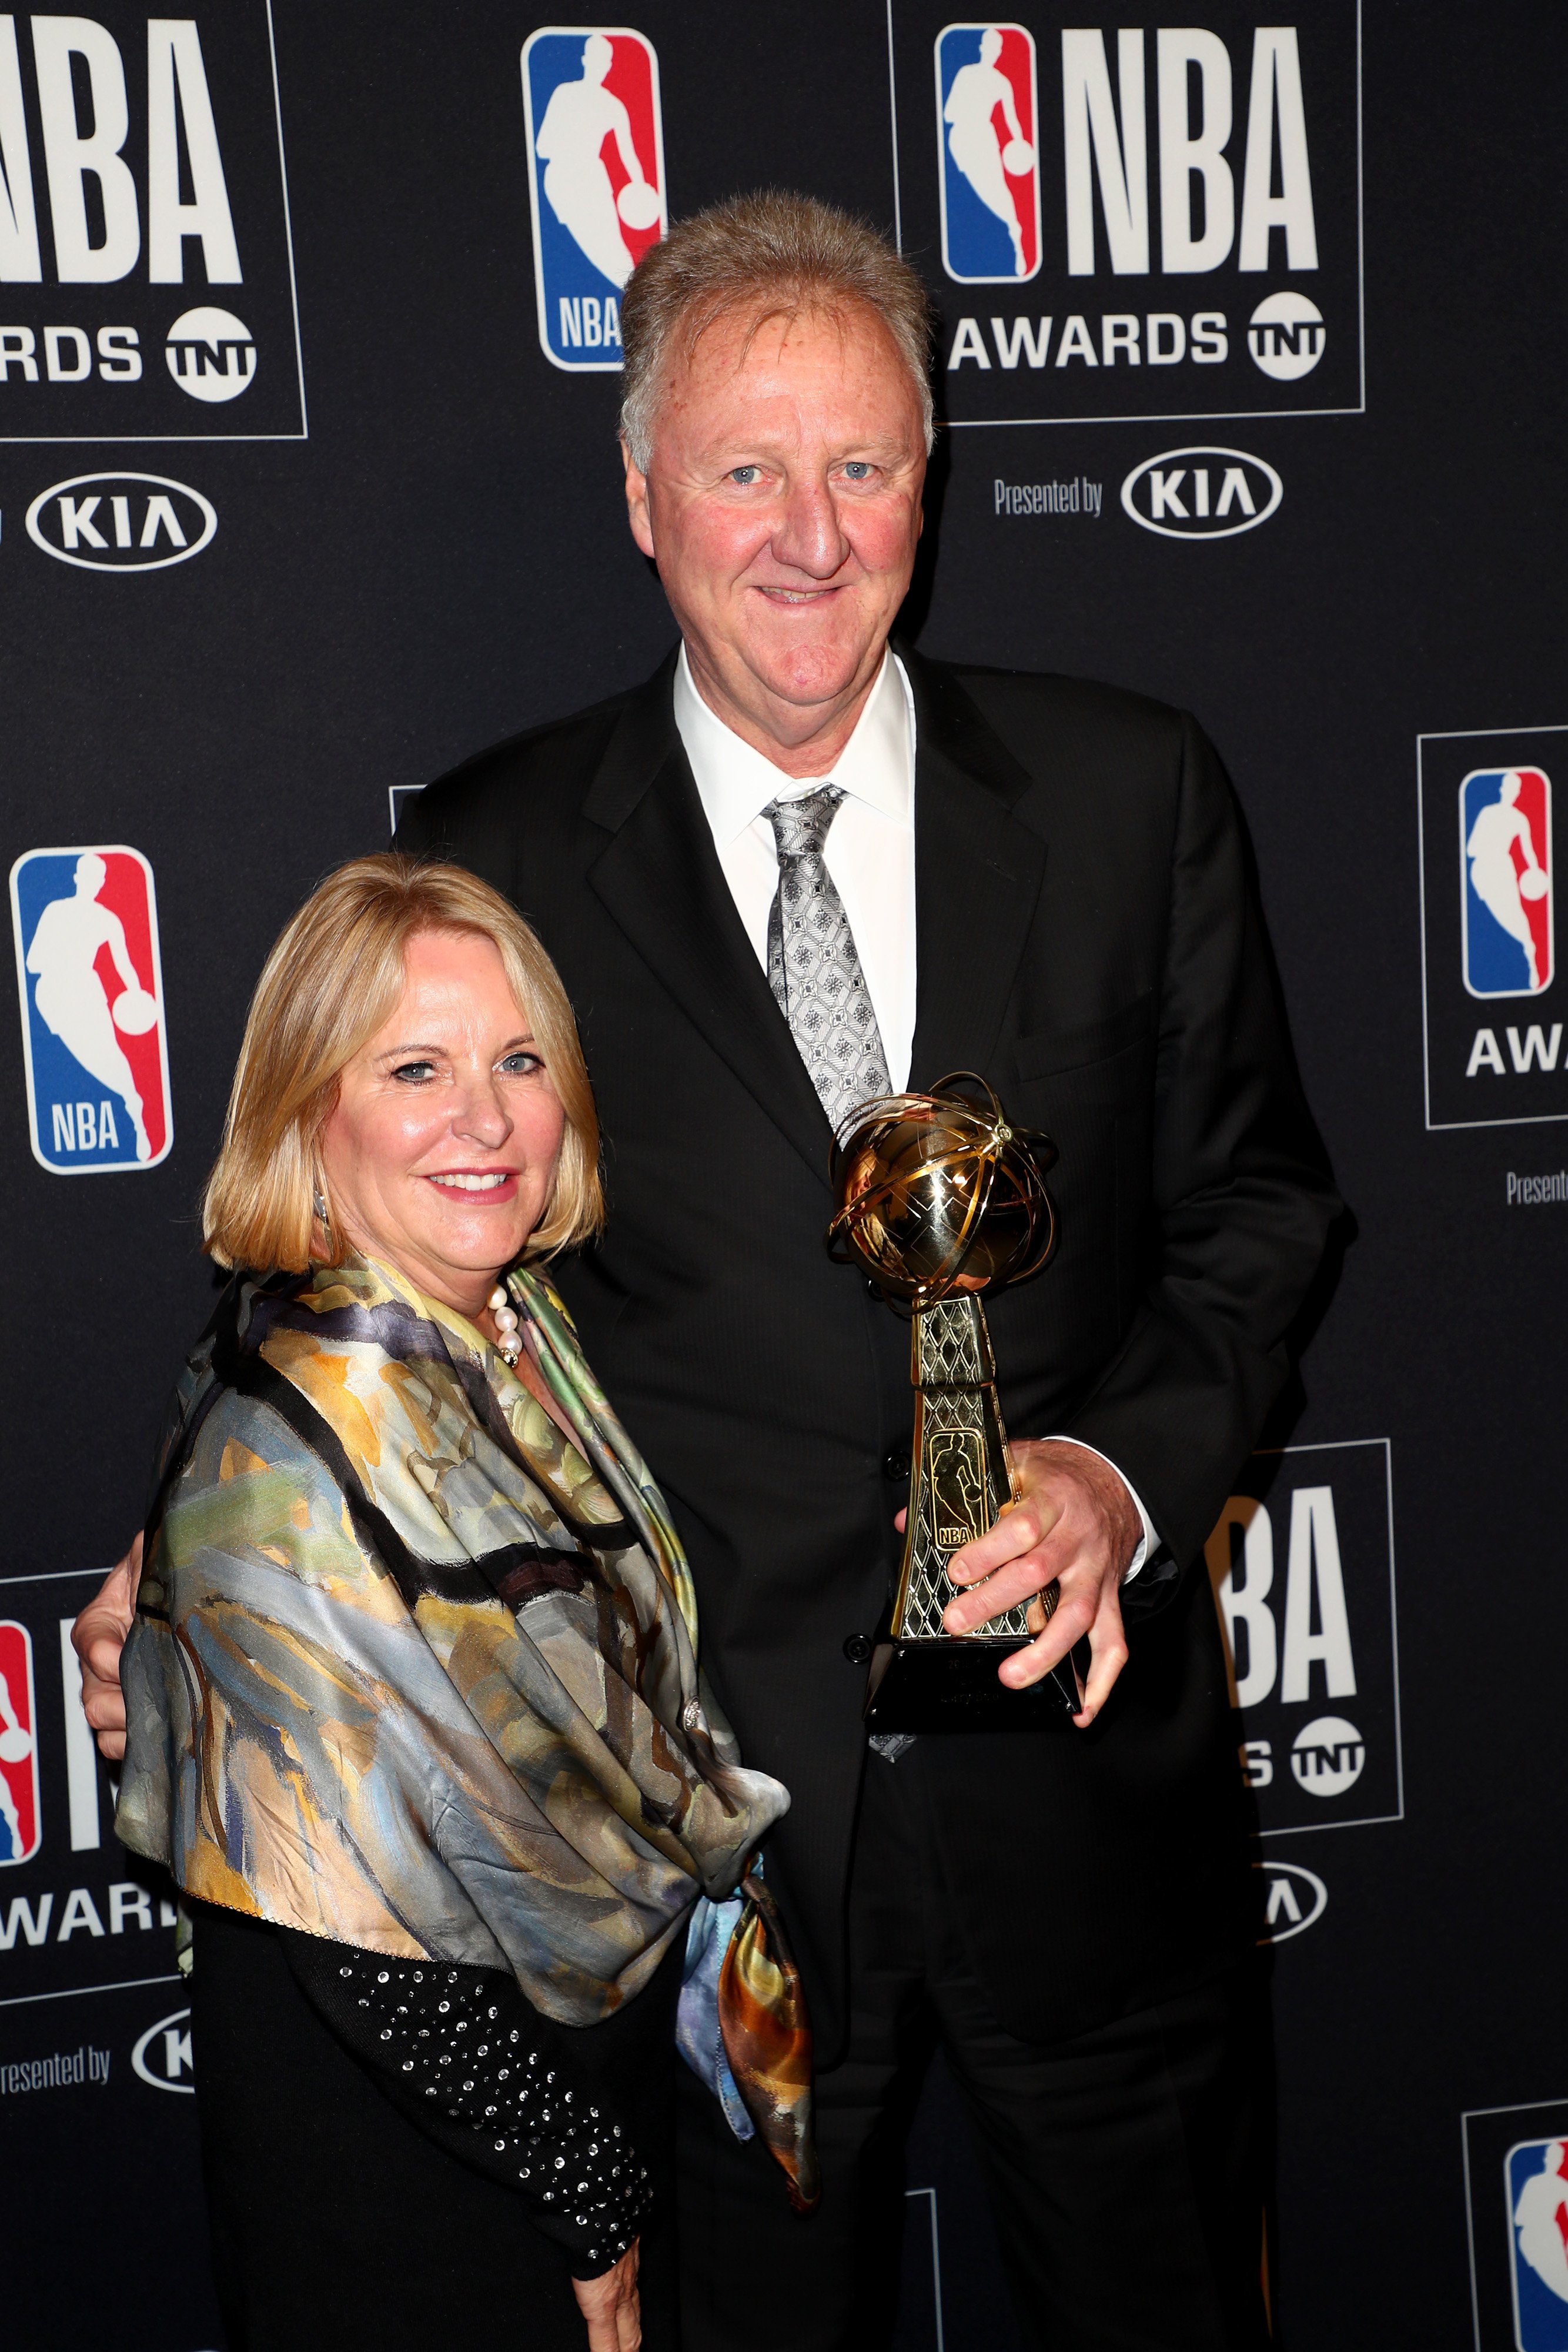 Dinah Mattingly and Larry Bird pose with the Lifetime Achievement award during the 2019 NBA Awards on June 24, 2019, in Santa Monica, California. | Source: Getty Images